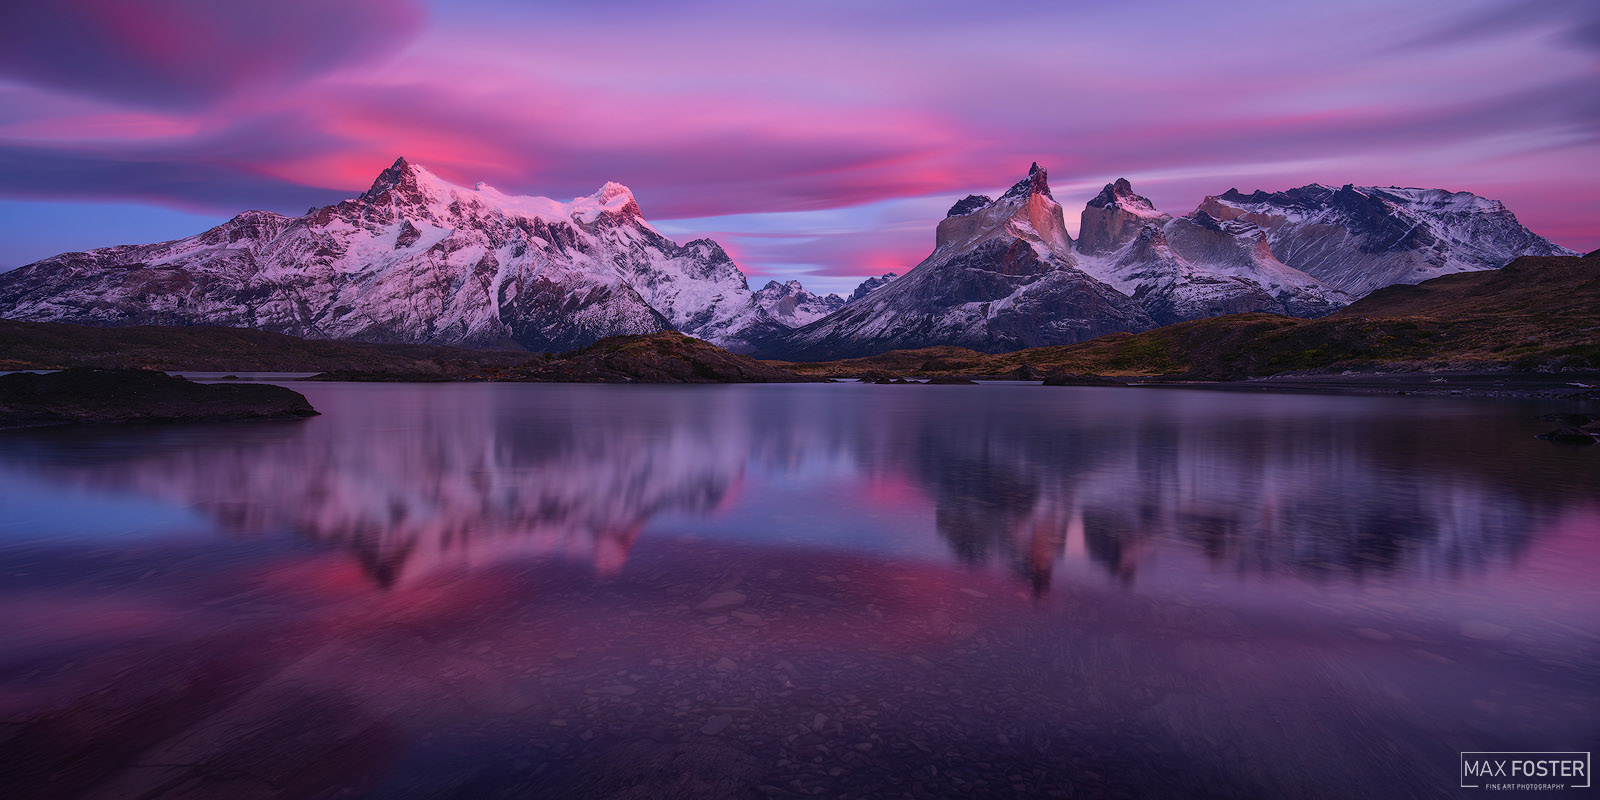 Transform your living space with The Ultimate Showcase, Max Foster's limited edition photography print of Torres Del Paine National...